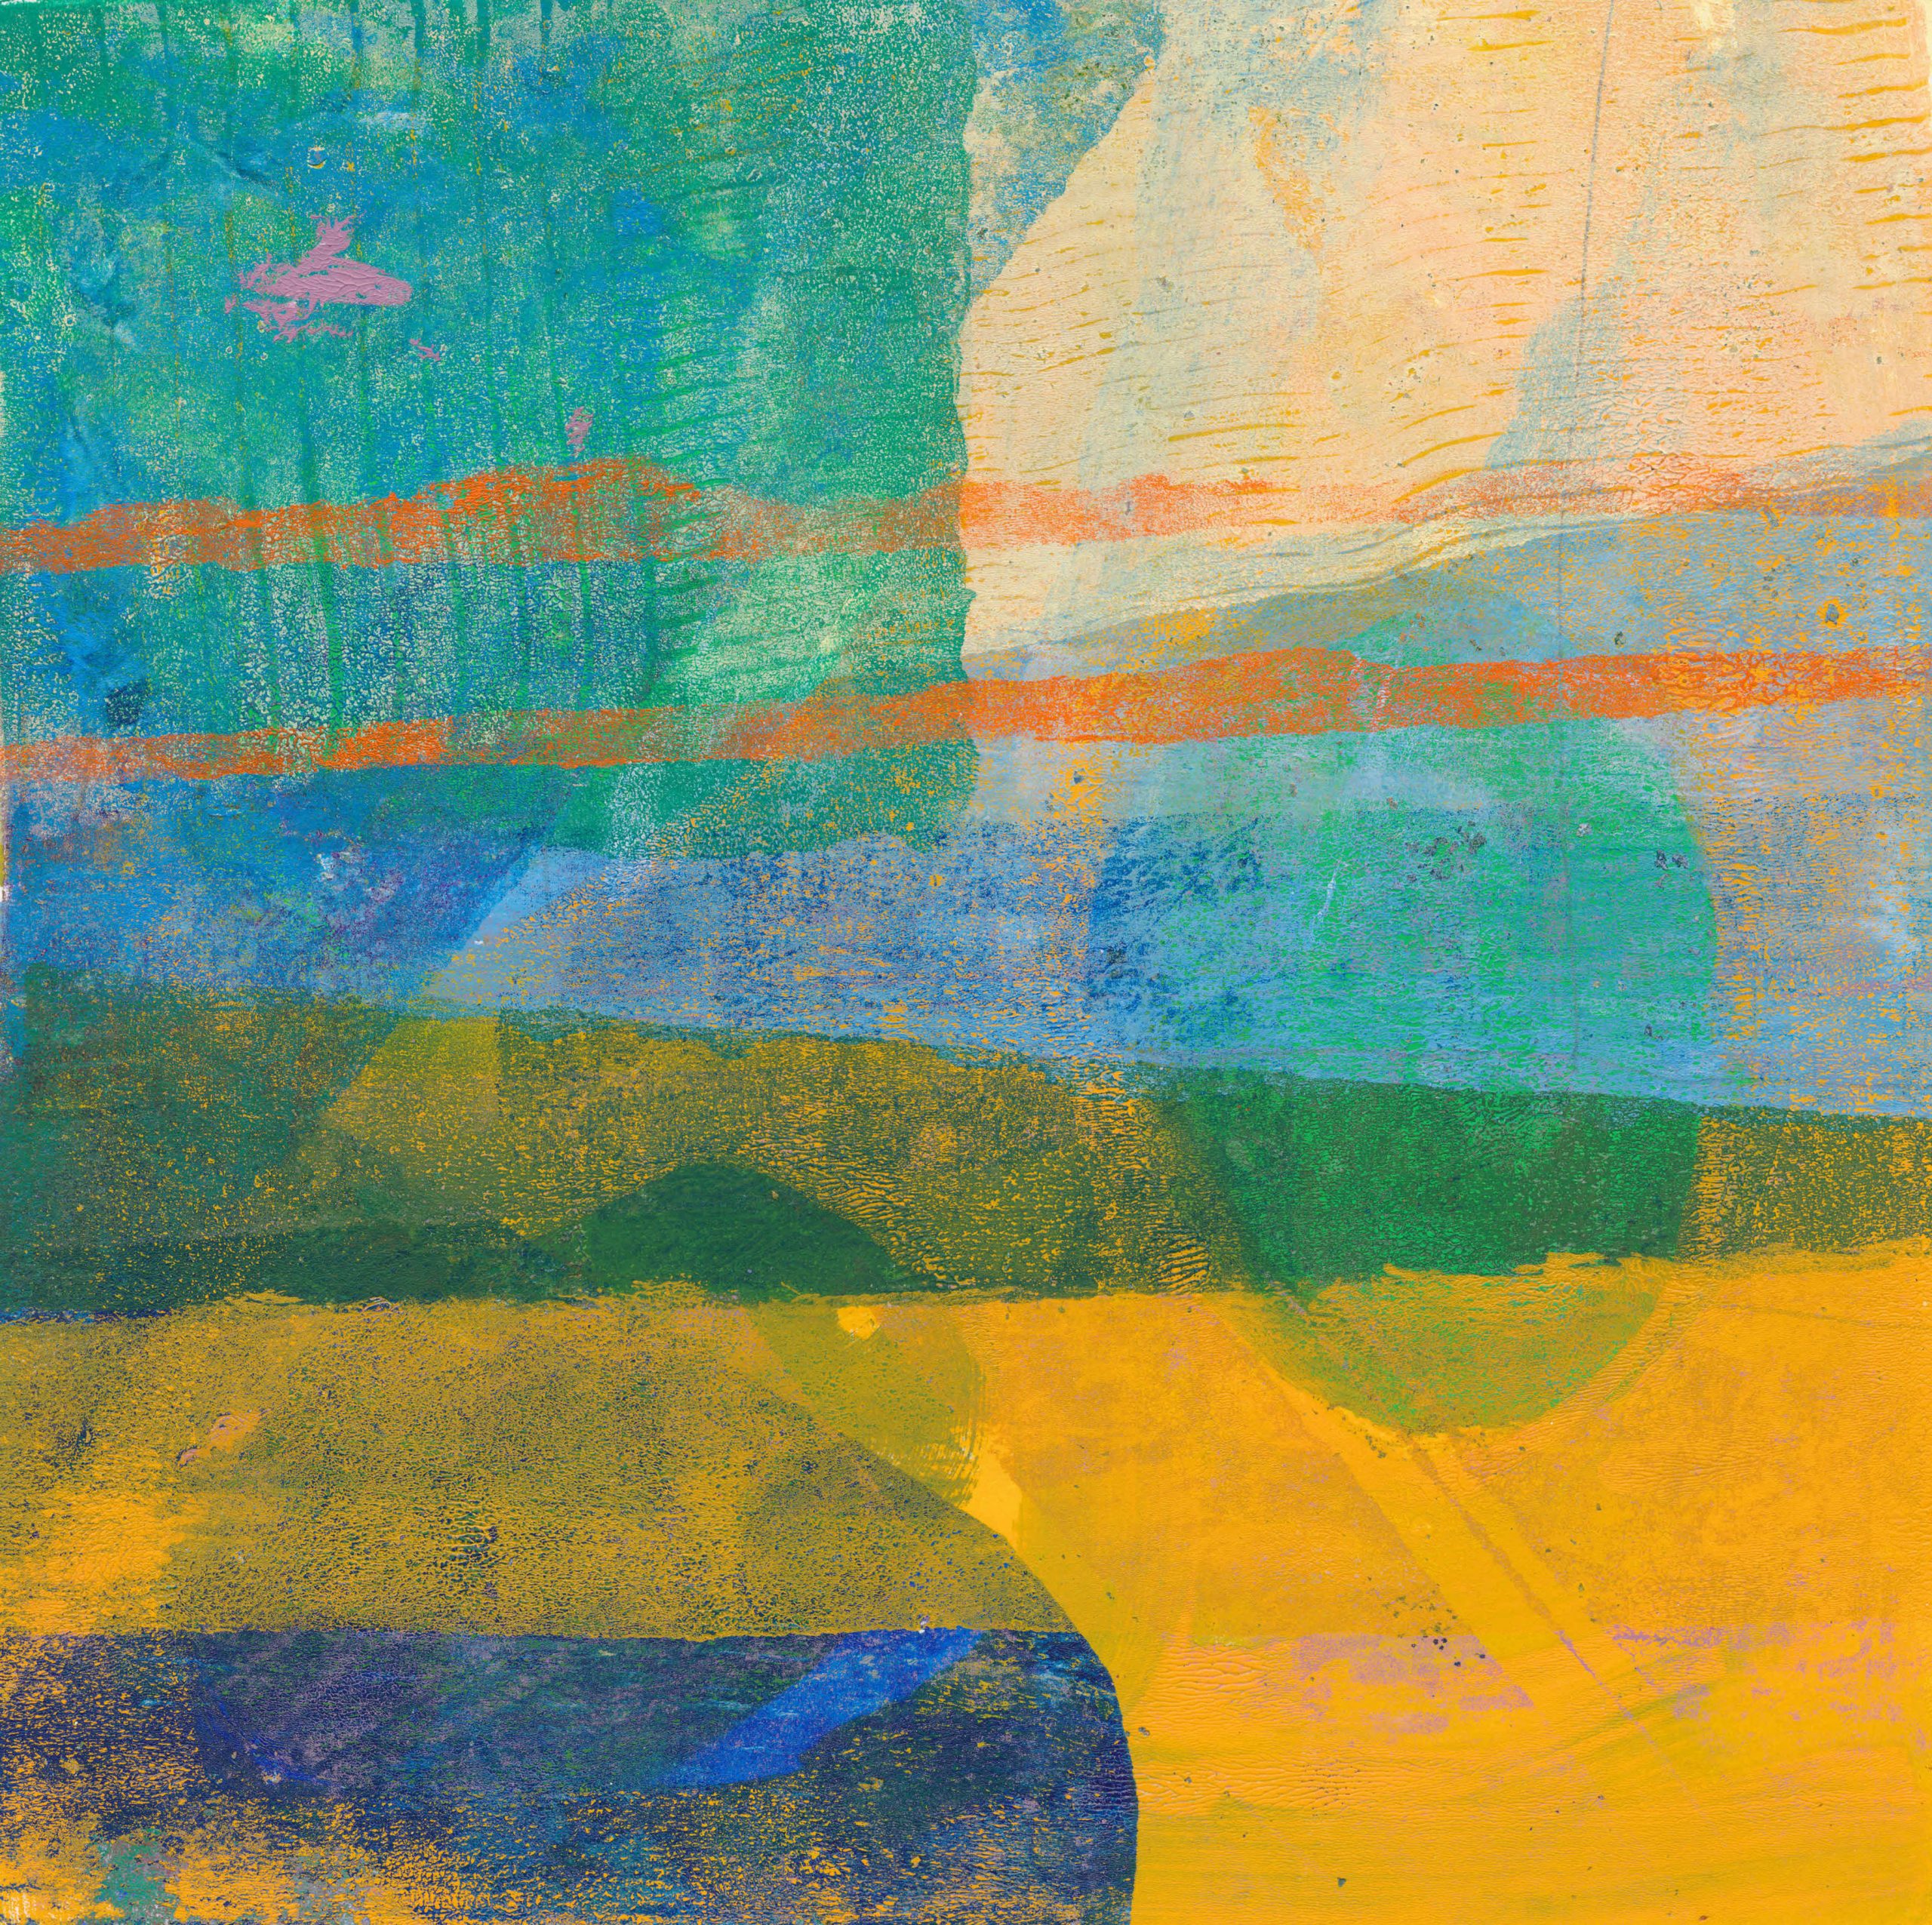 Monotype print, acryic on paper, in yellows, greens and blues.